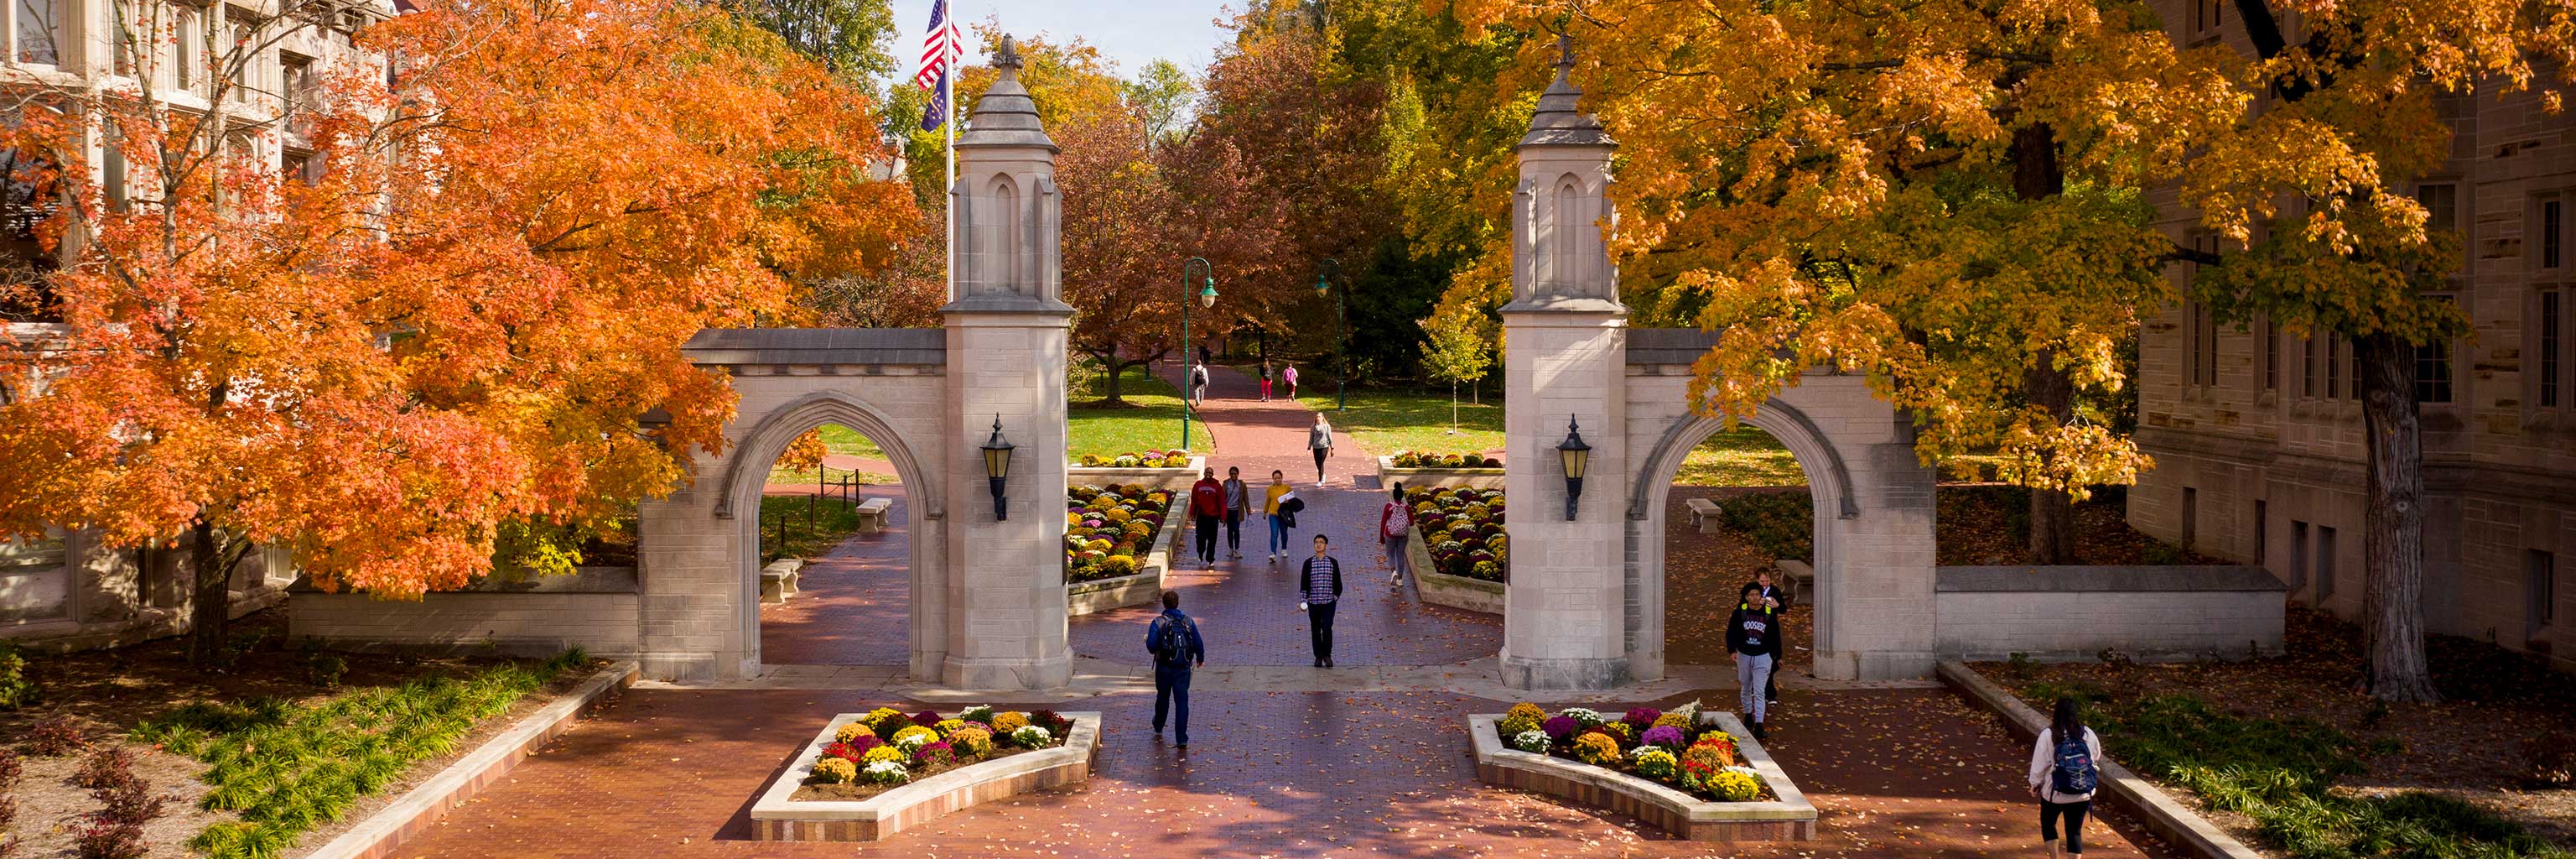 A longshot photo of the Sample Gates, with autumn foliage in the background.